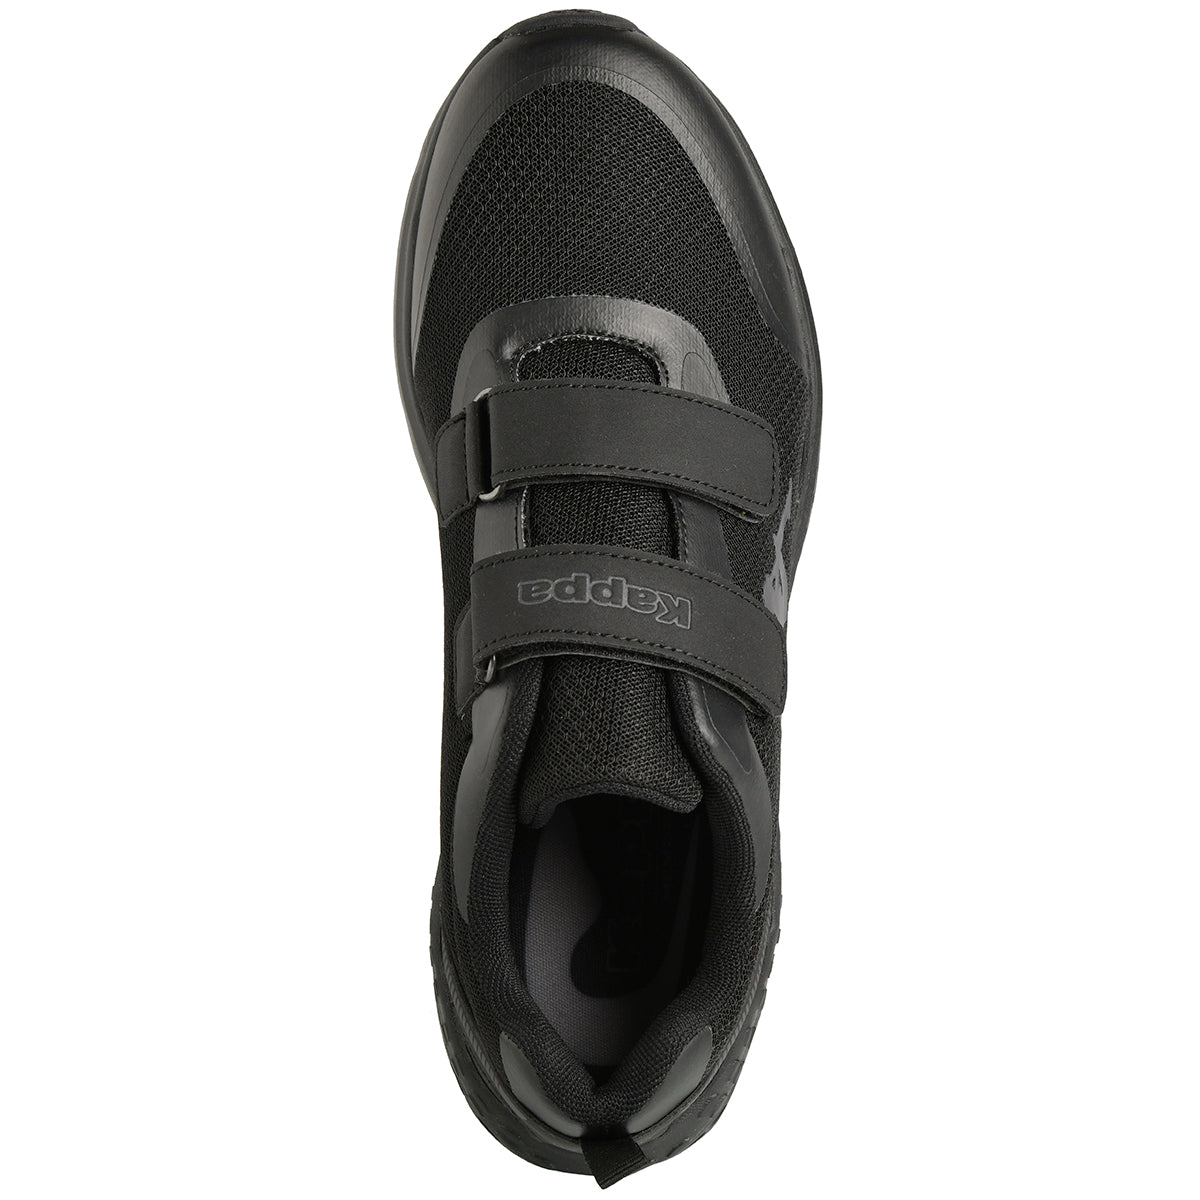 Chaussures training Glinch V 2 noir homme - Image 4